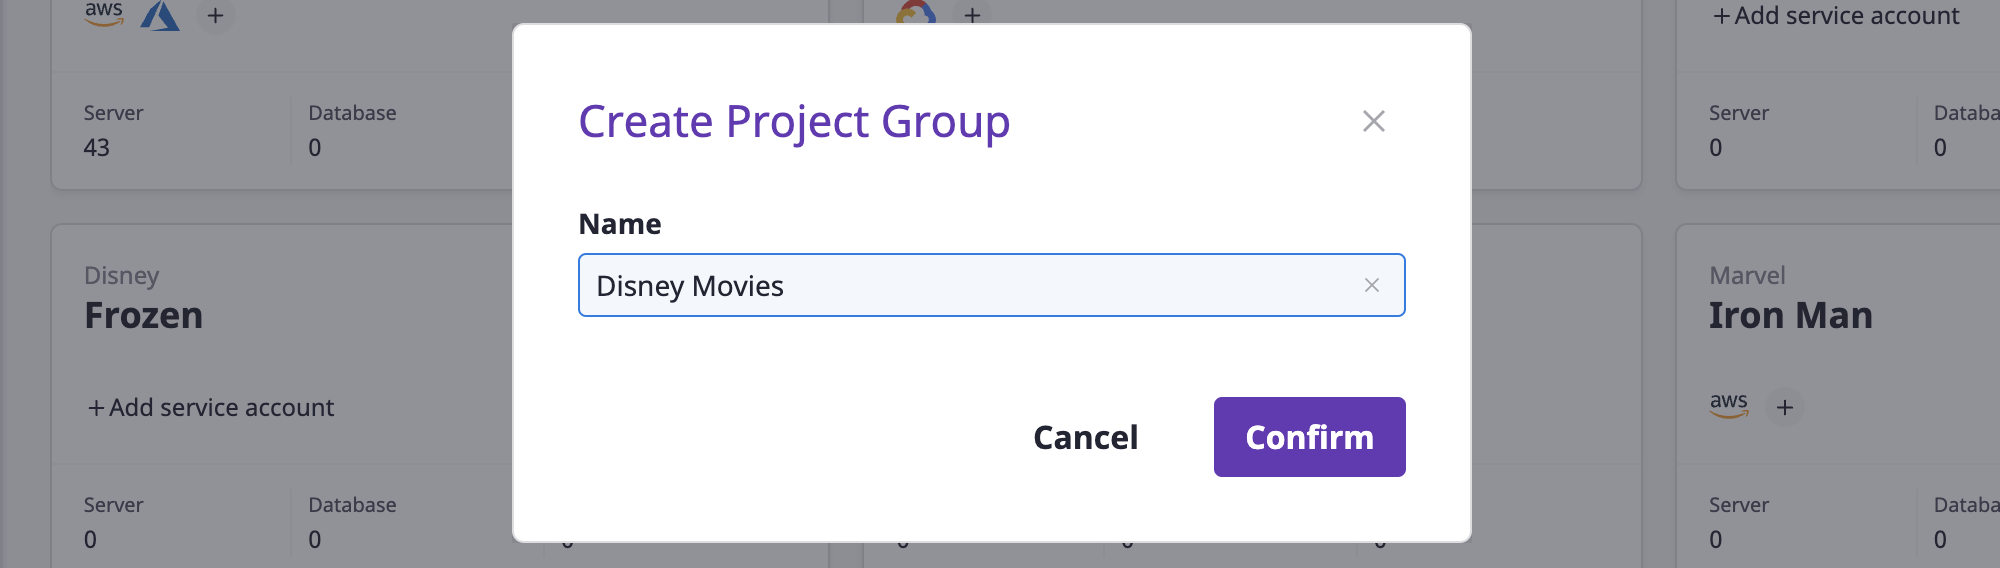 project-group-child-create-modal